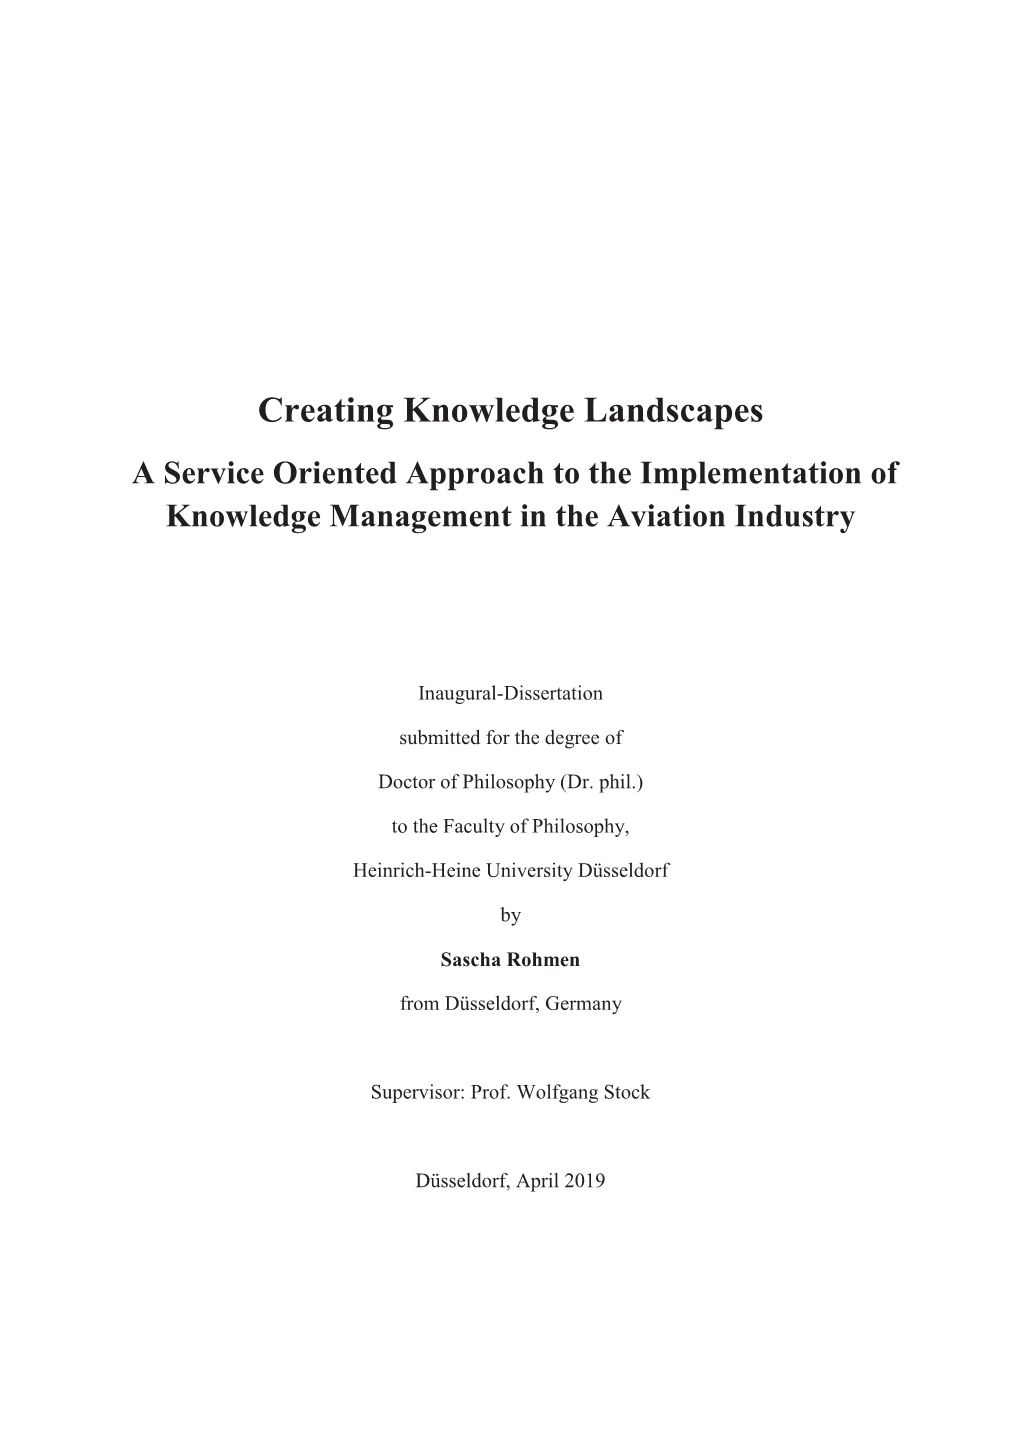 Creating Knowledge Landscapes a Service Oriented Approach to the Implementation of Knowledge Management in the Aviation Industry